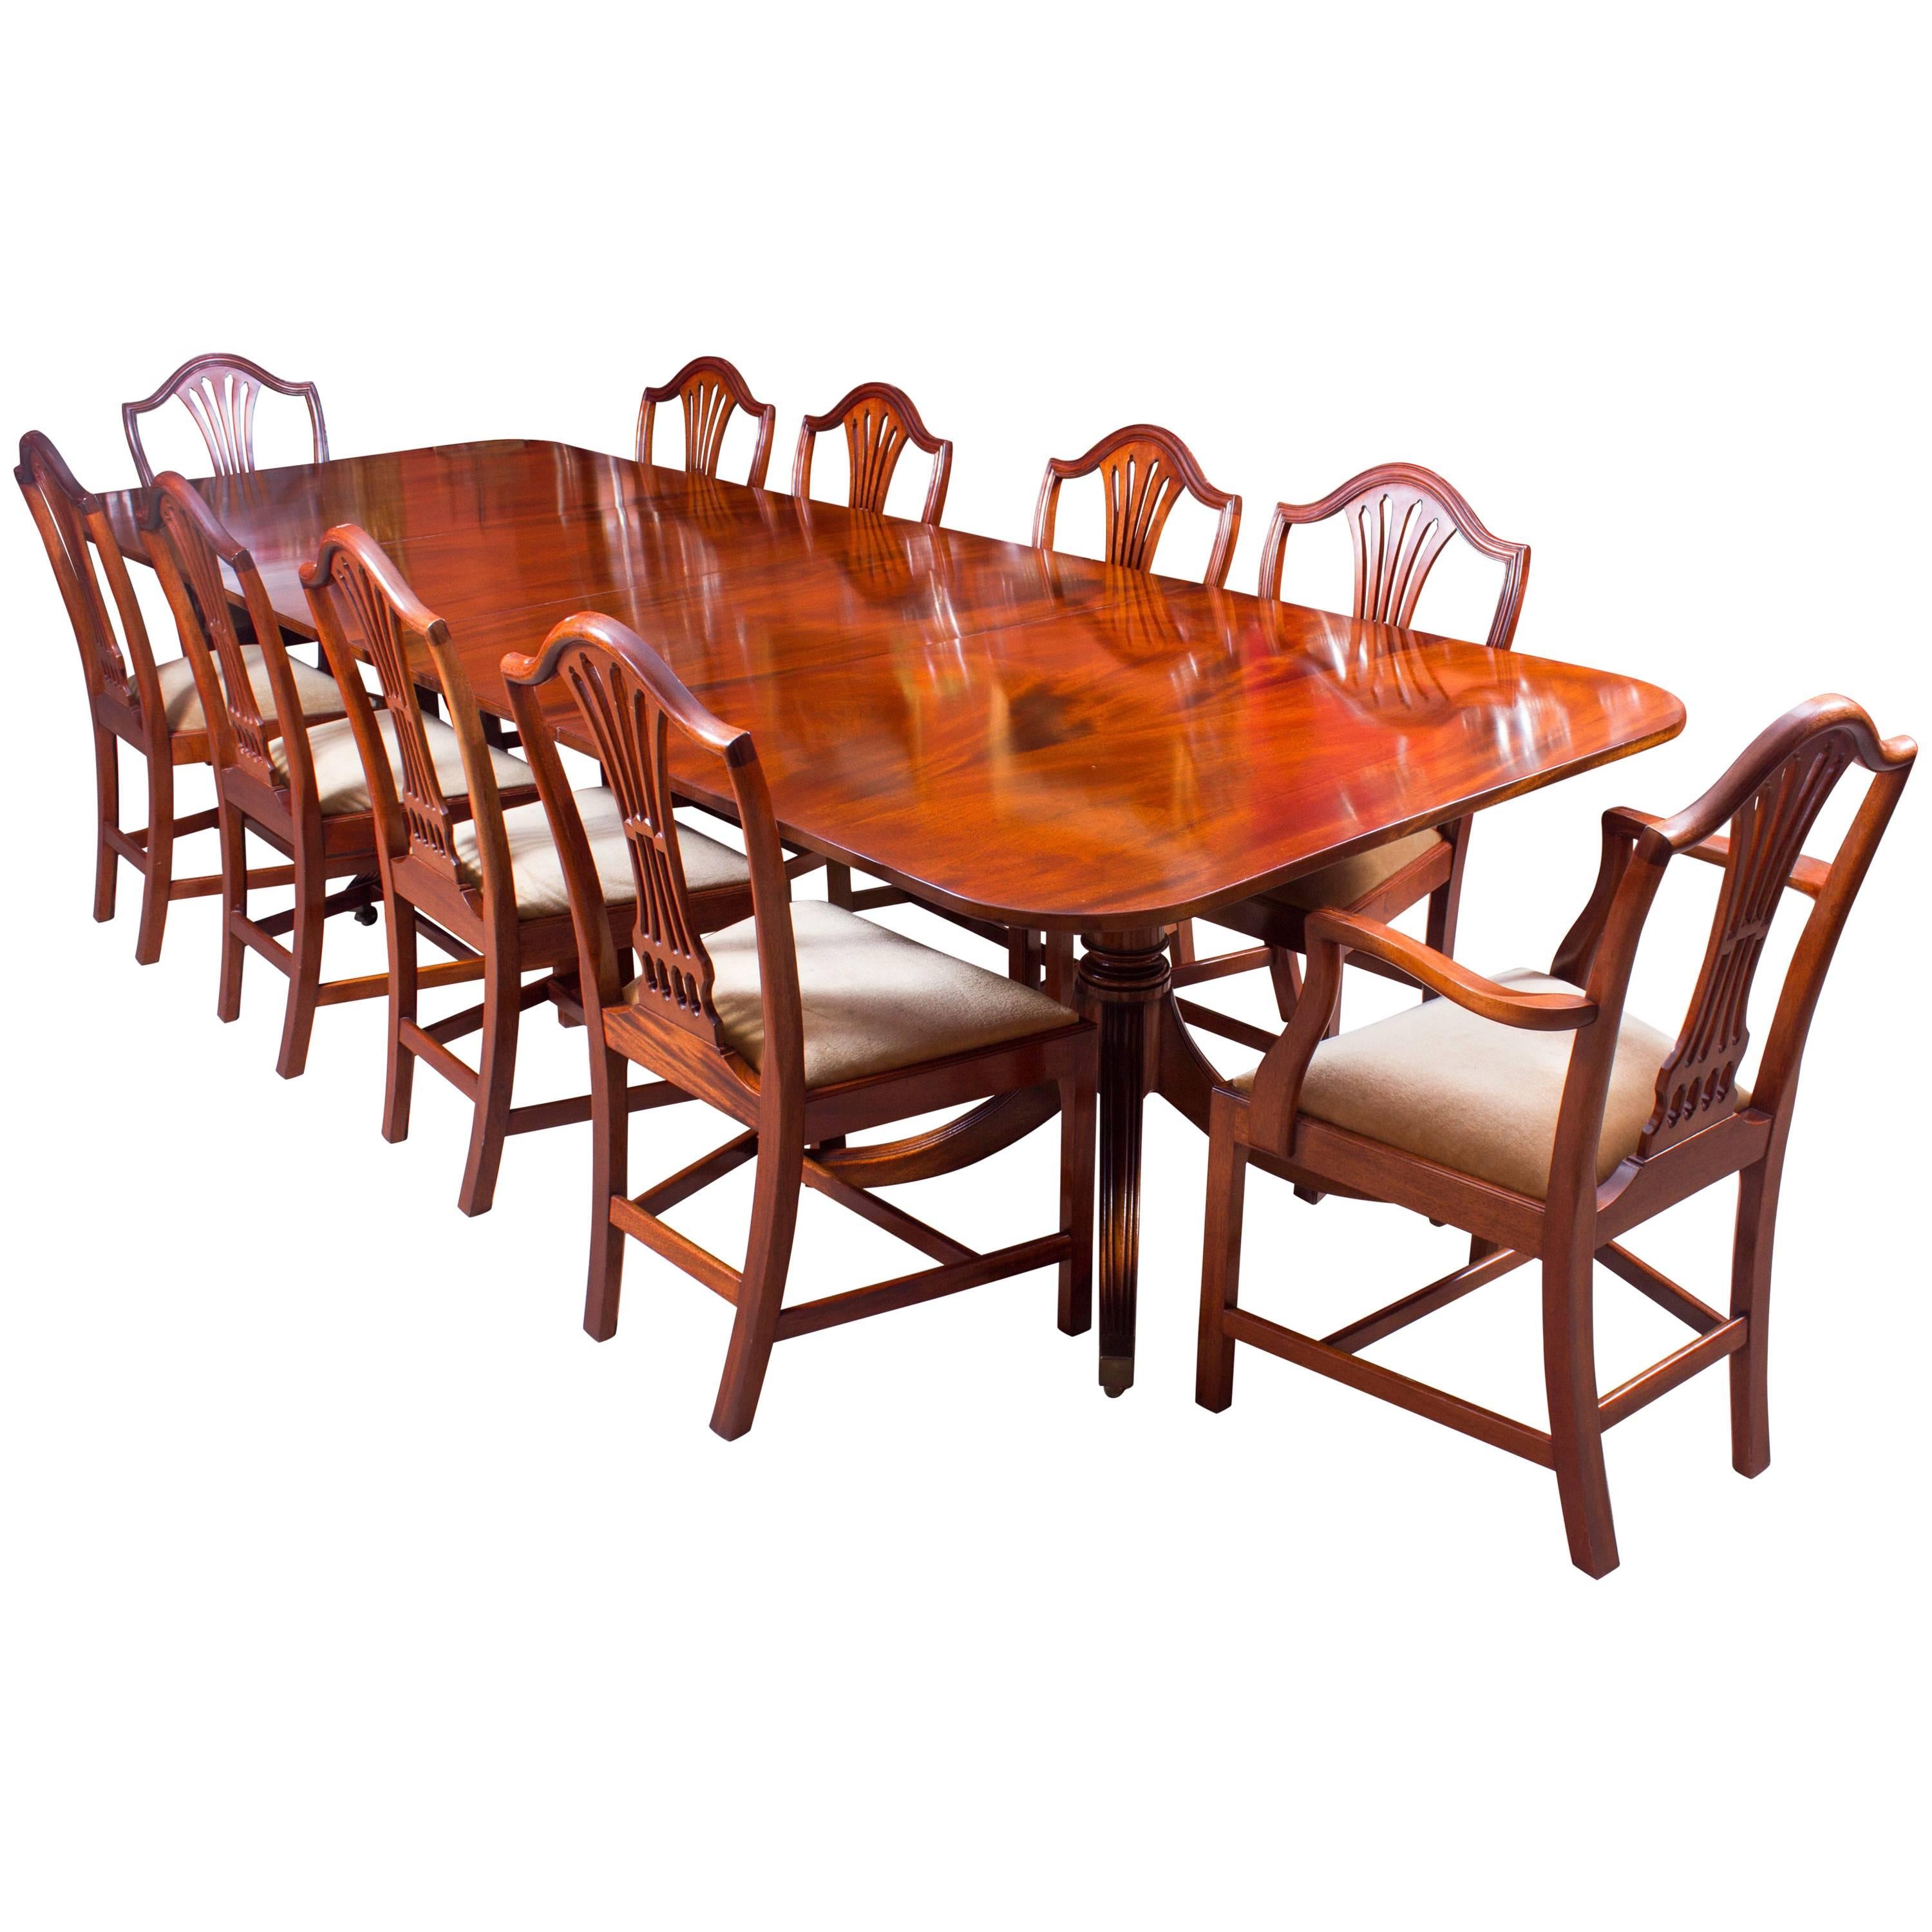 Vintage William Tillman Regency Dining Table and Ten Chairs, Late 20th Century